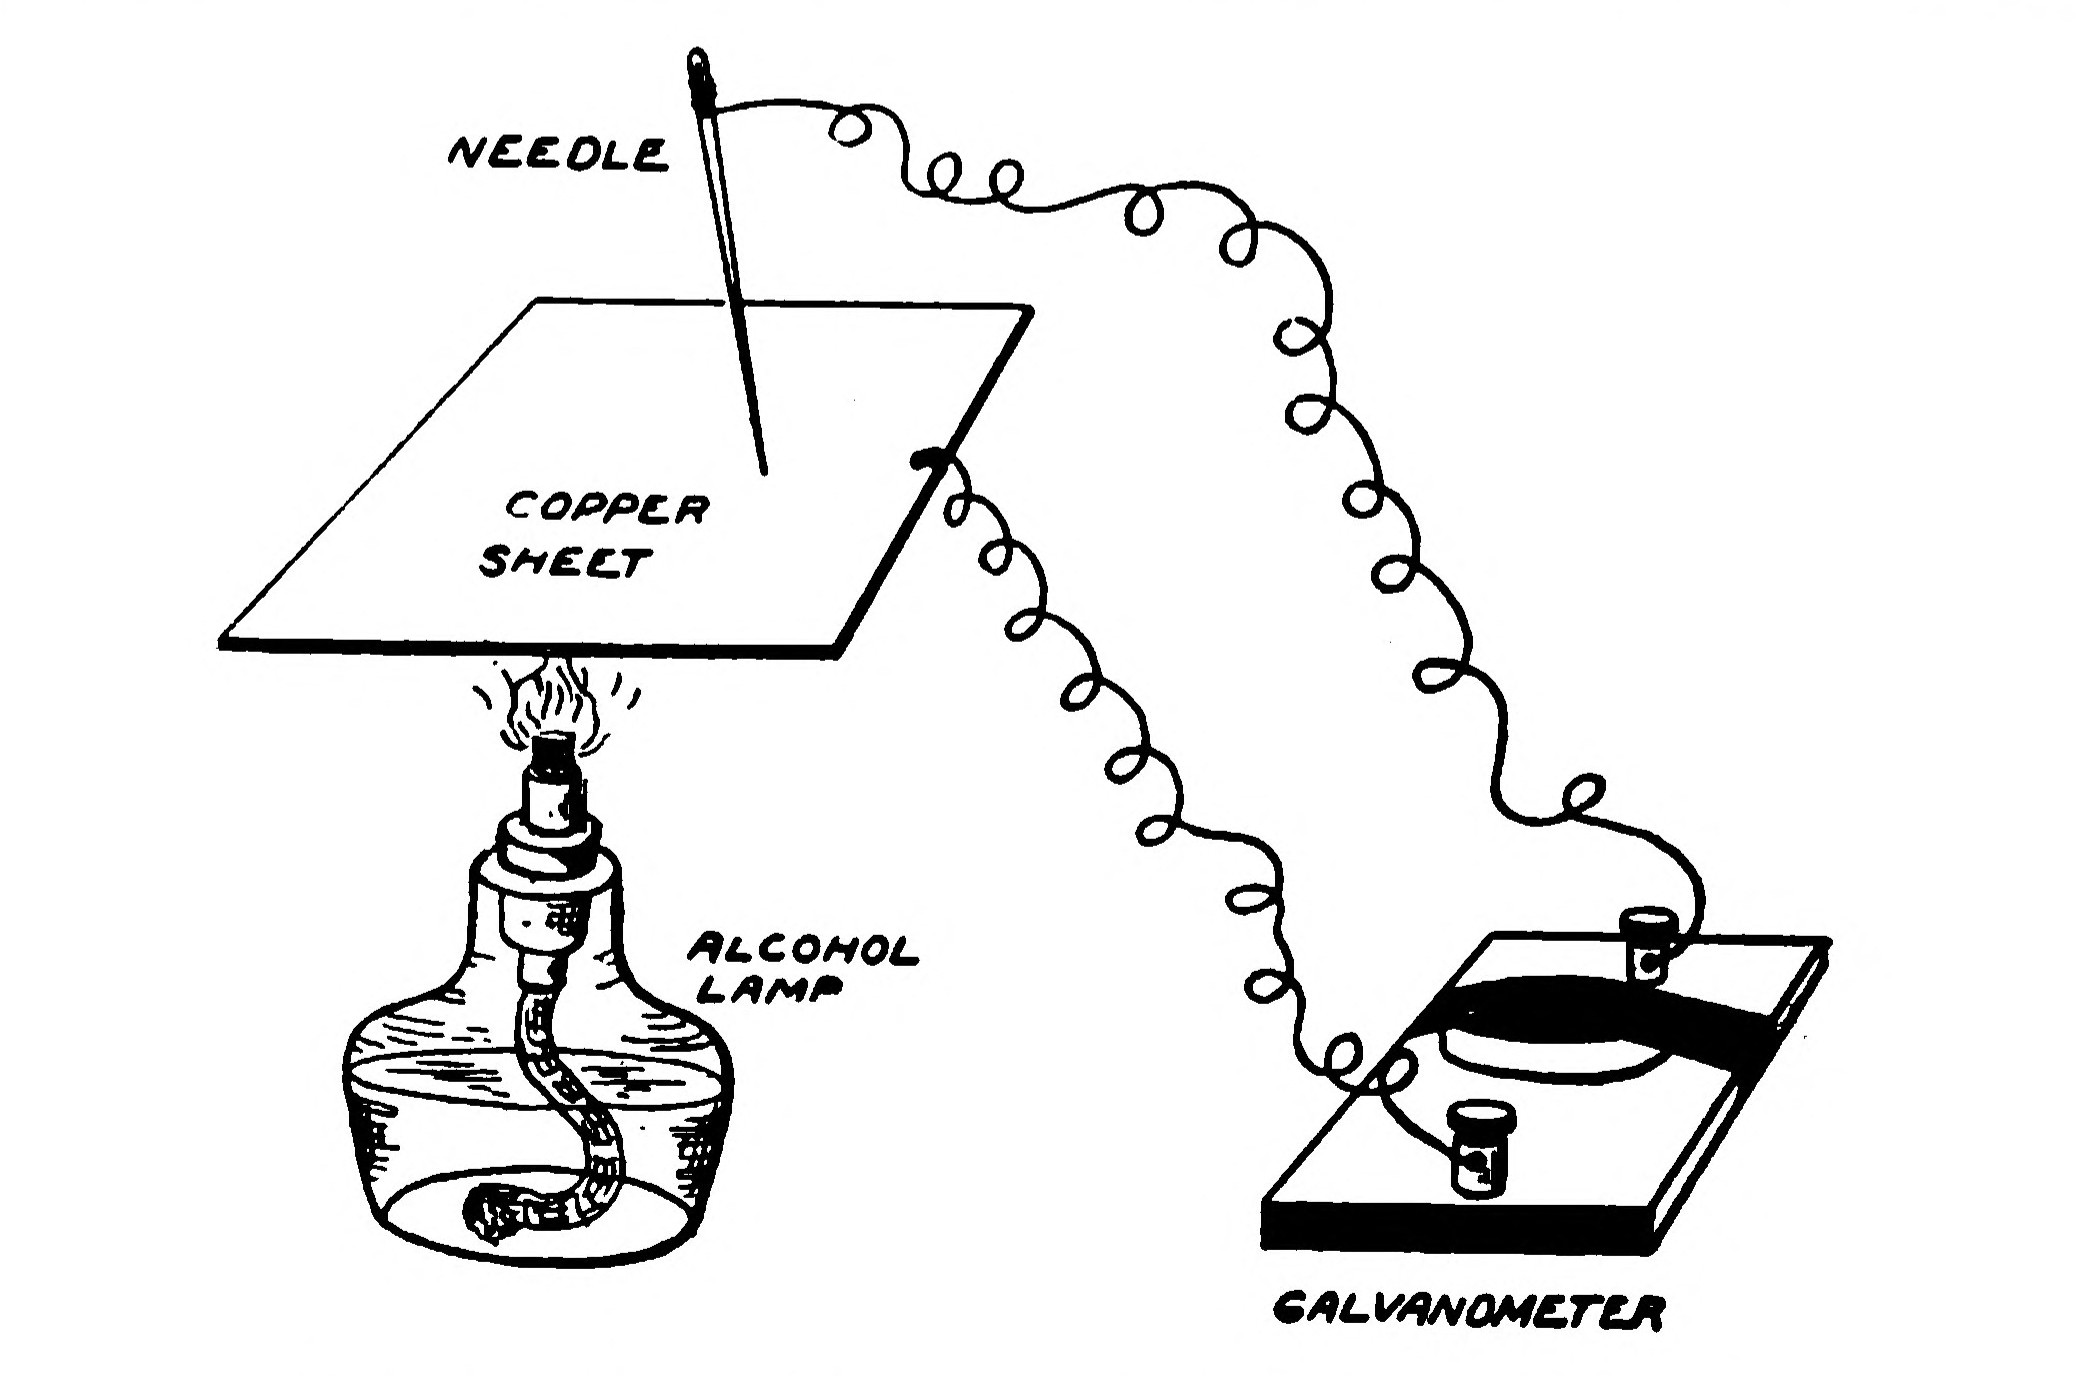 FIG. 187.—Generating Electric Current by Heat.